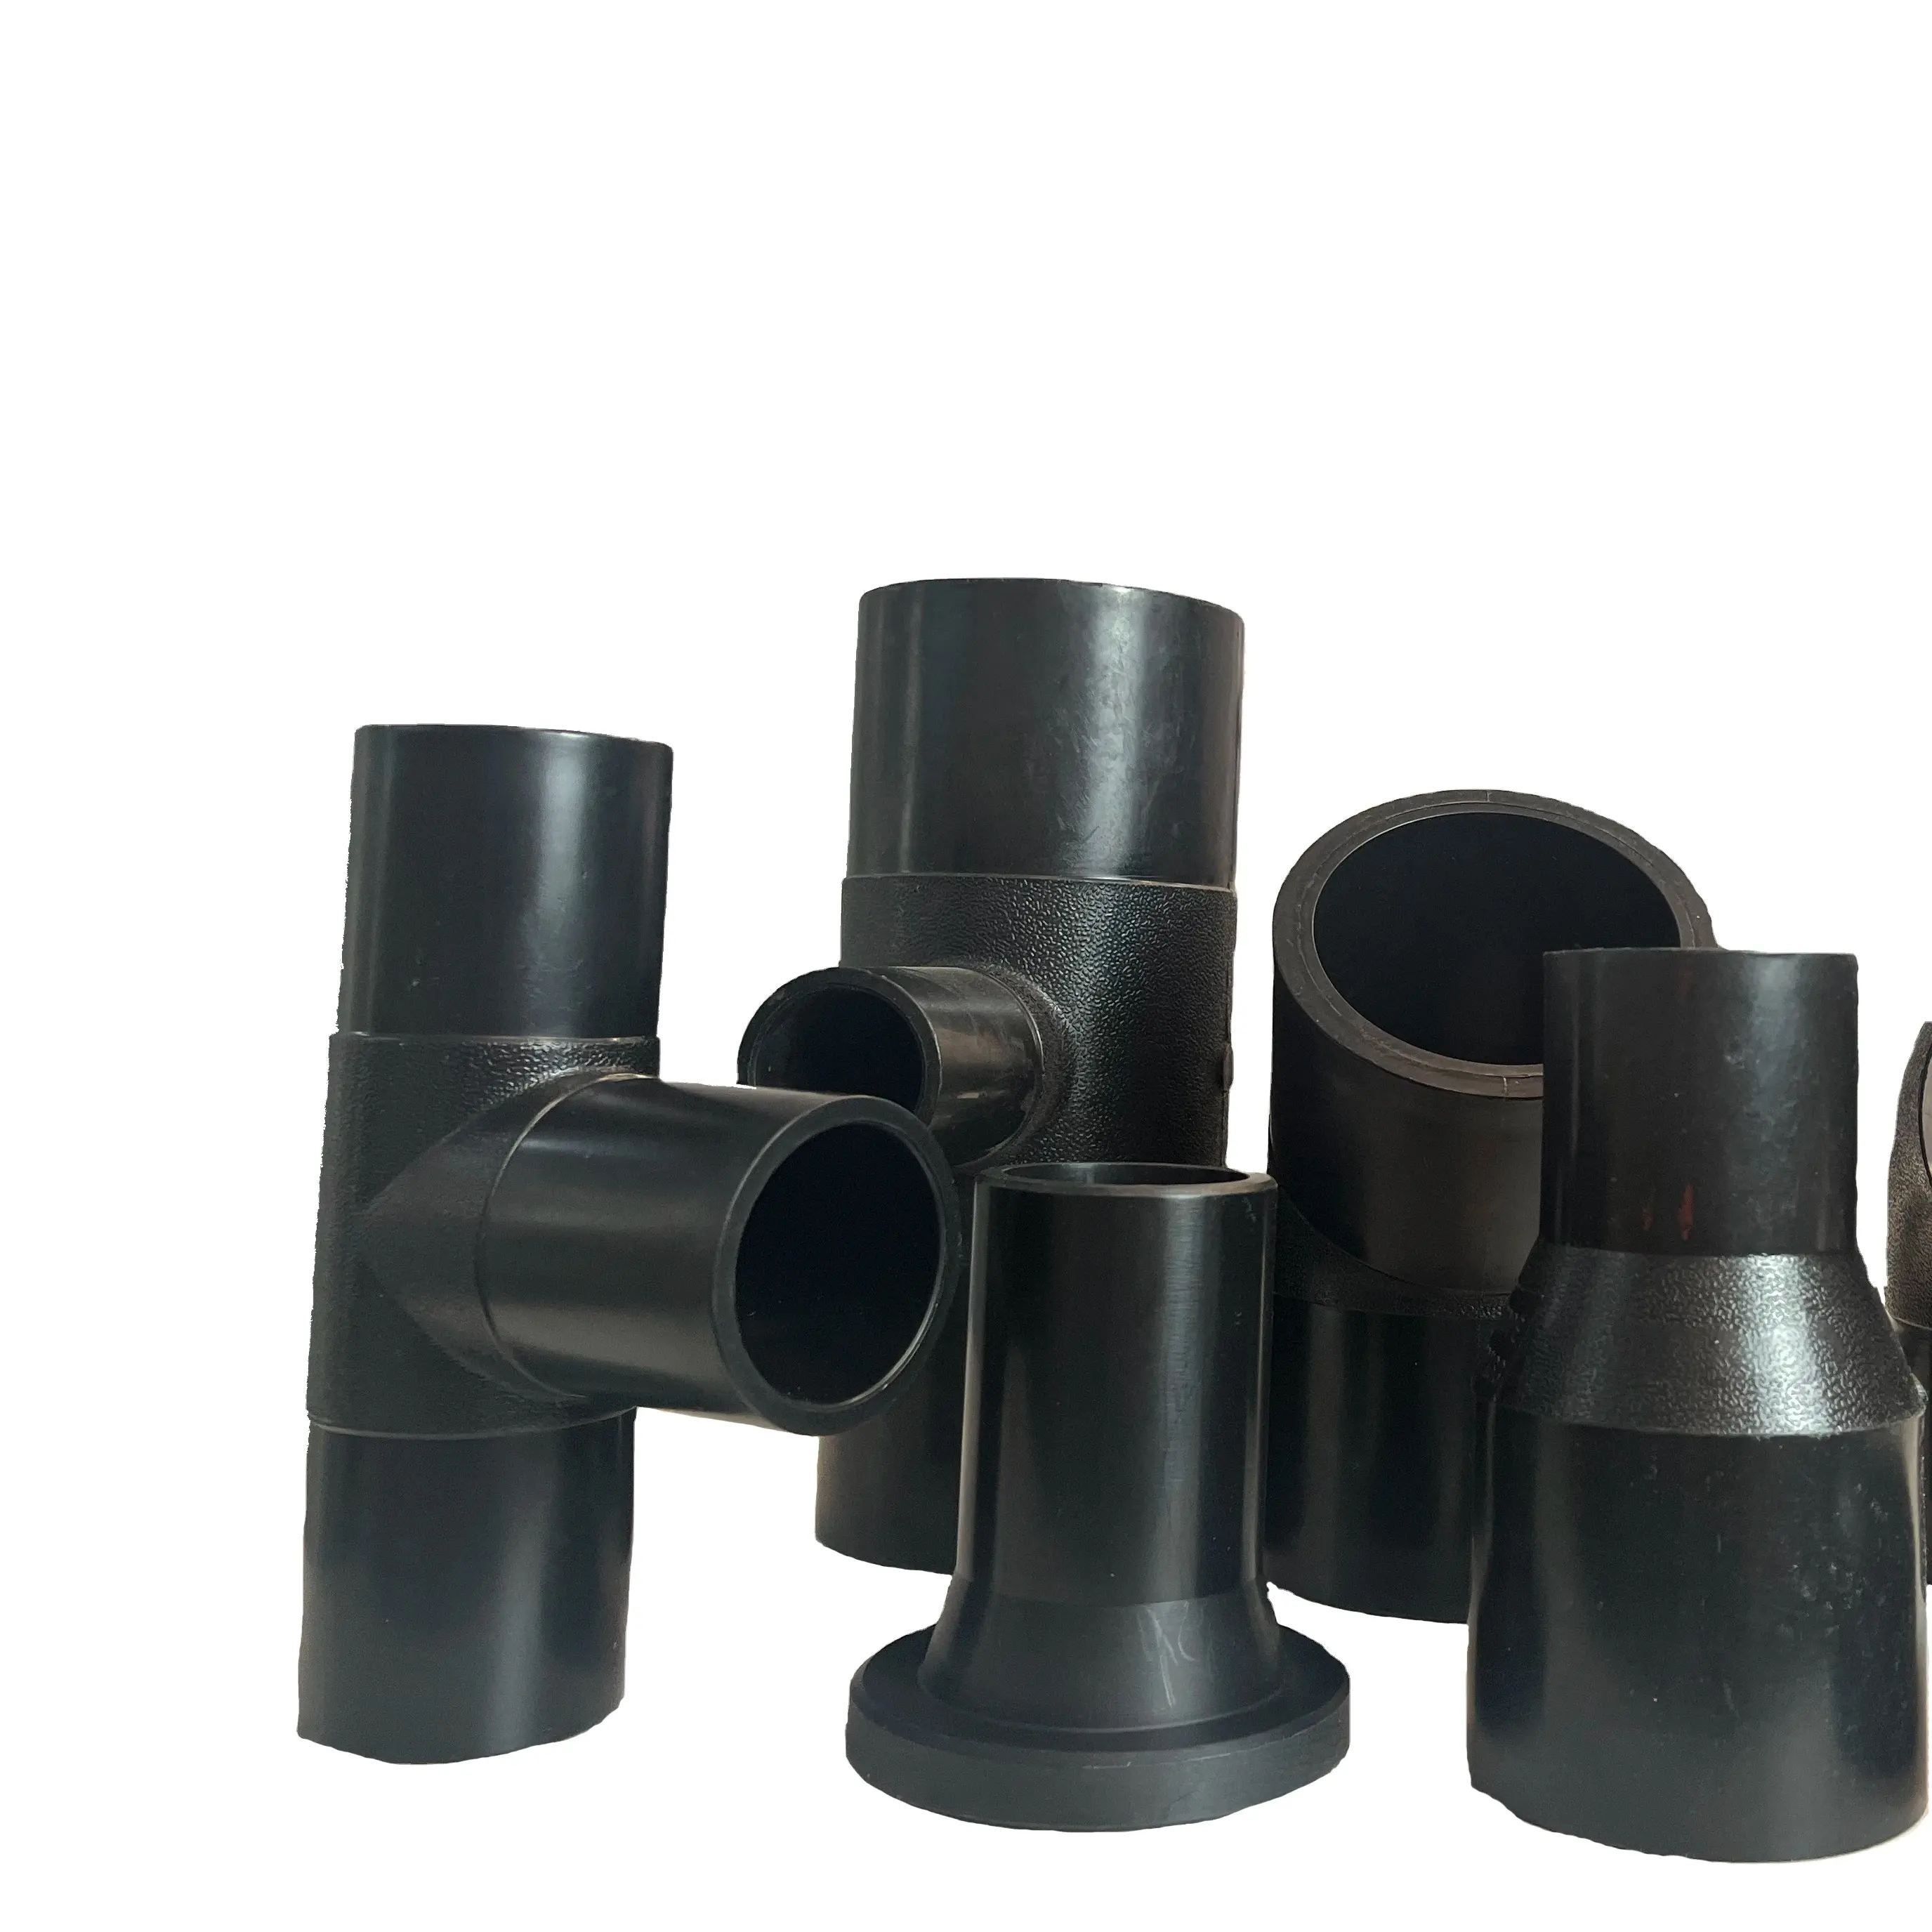 Durable HDPE pipe fittings butt fusion PE plastic welding elbow flange reducer cap